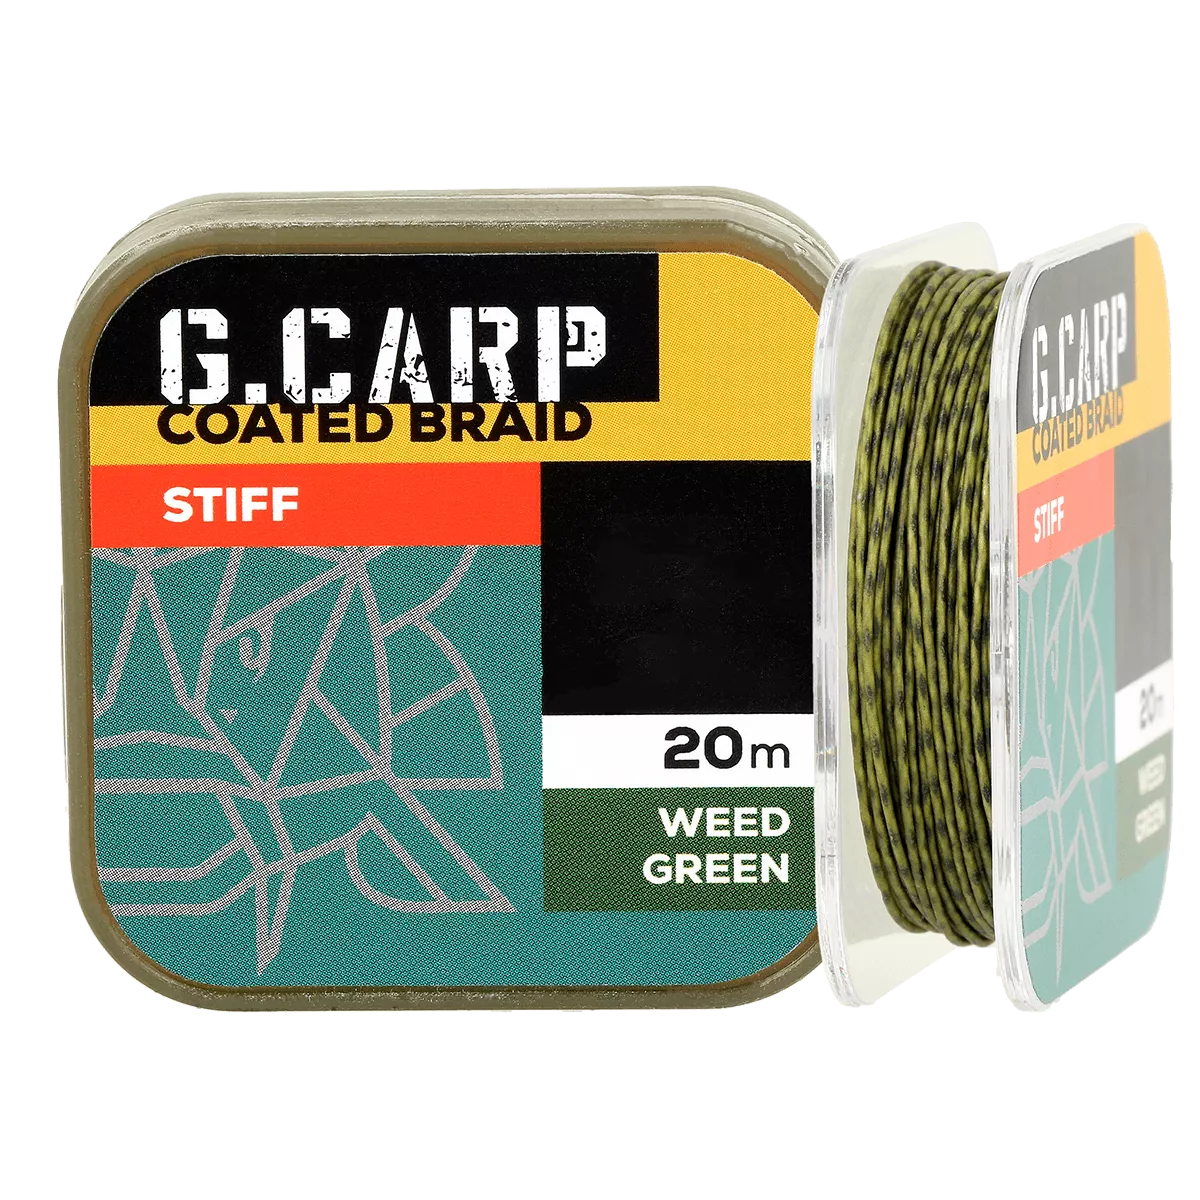 Golden Catch G.Carp Coated Braid Stiff 20m: check it out on the